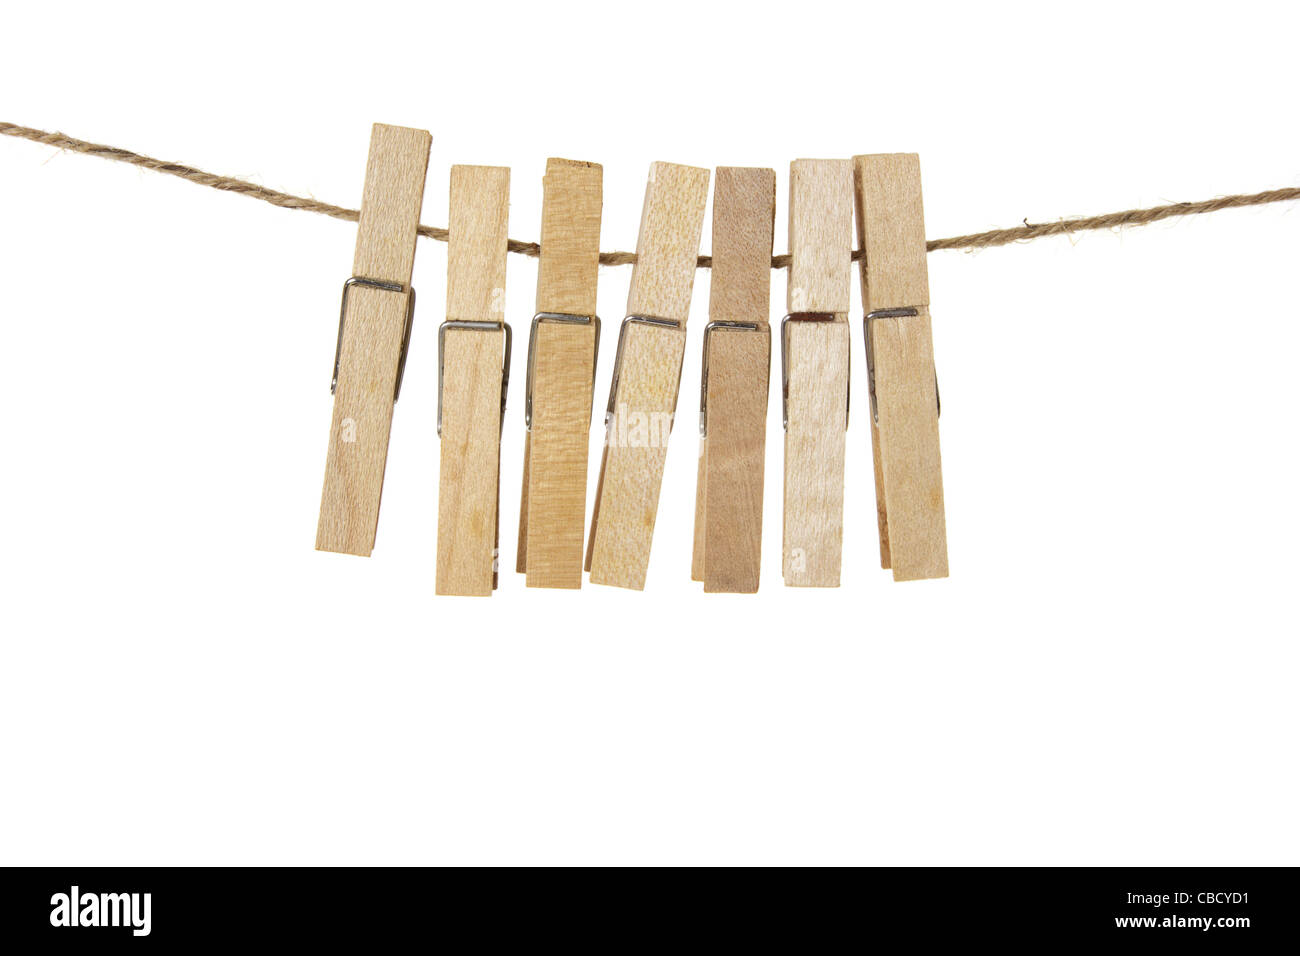 Clothes Pegs on Clothes Line Stock Photo